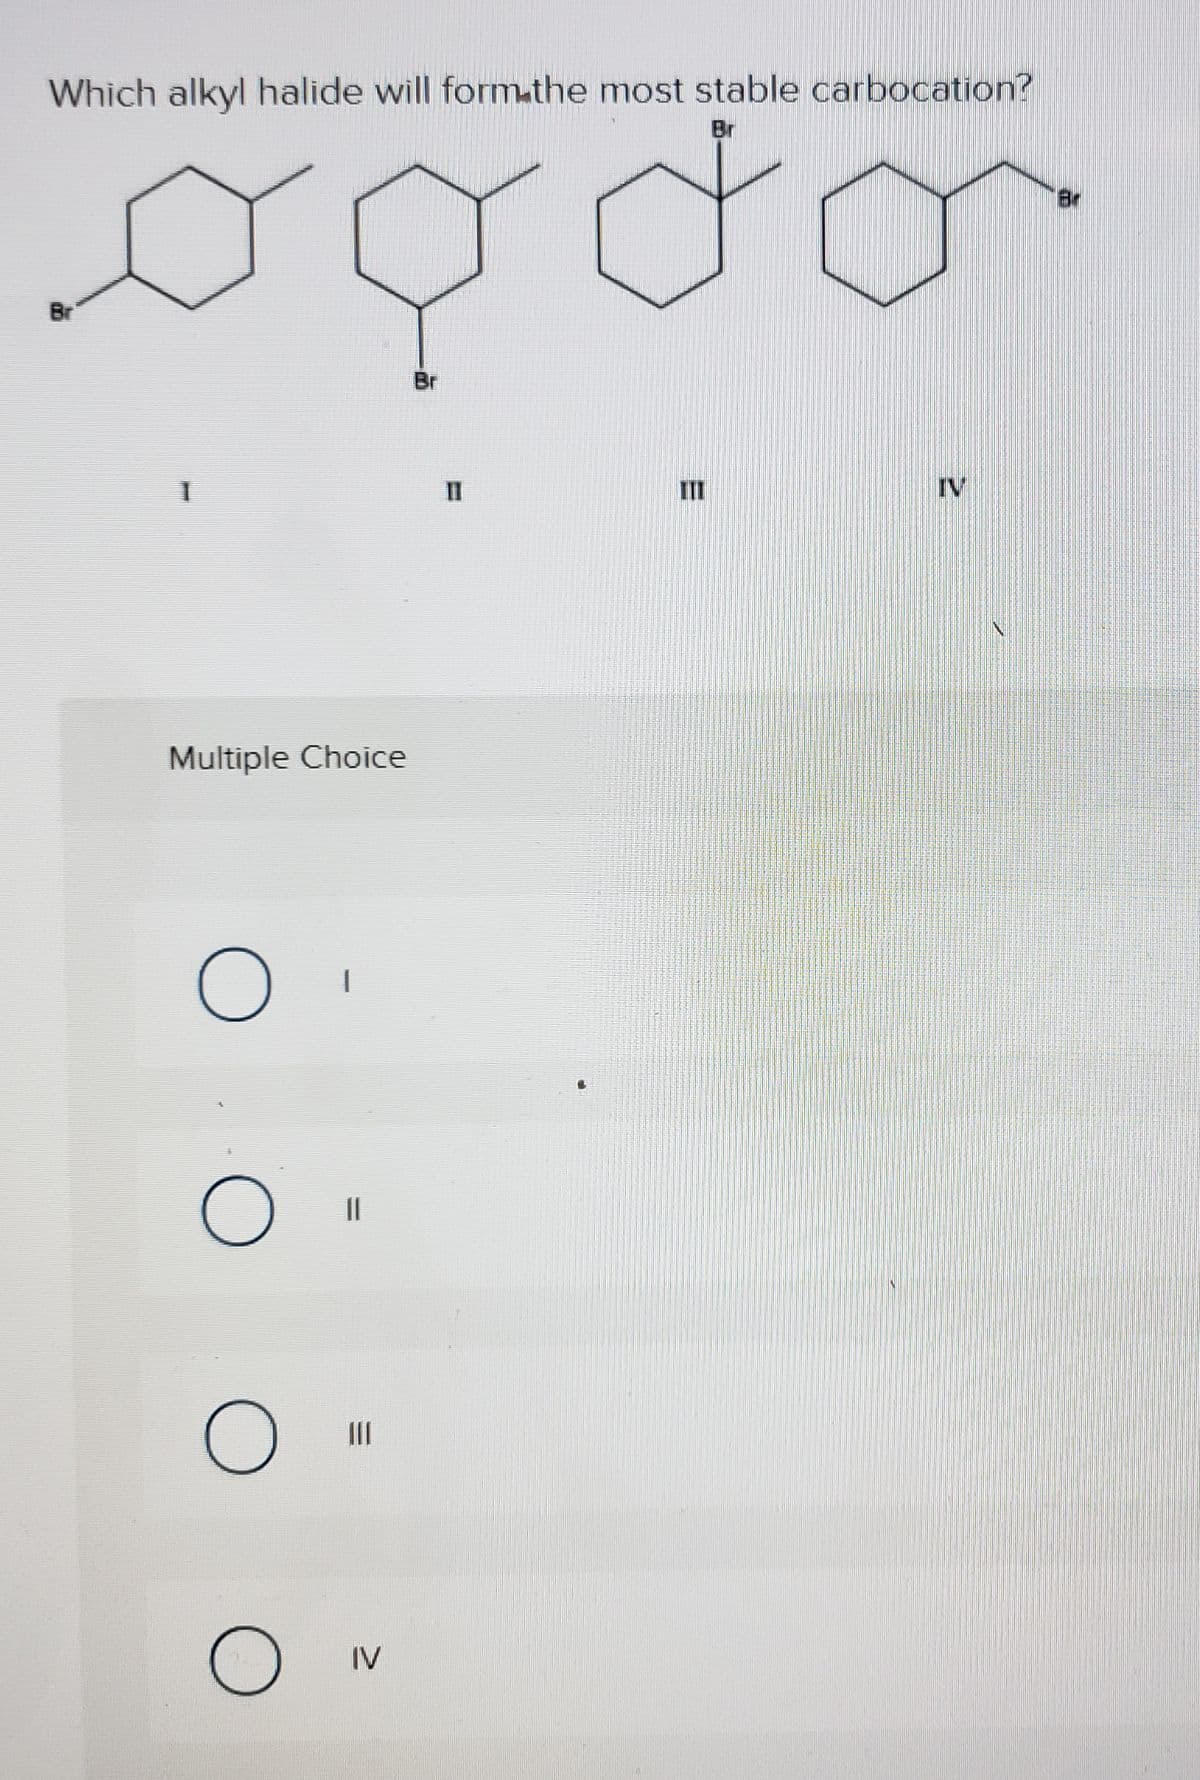 Which alkyl halide will form.the most stable carbocation?
Br
Br
Br
III
IV
Multiple Choice
IV
